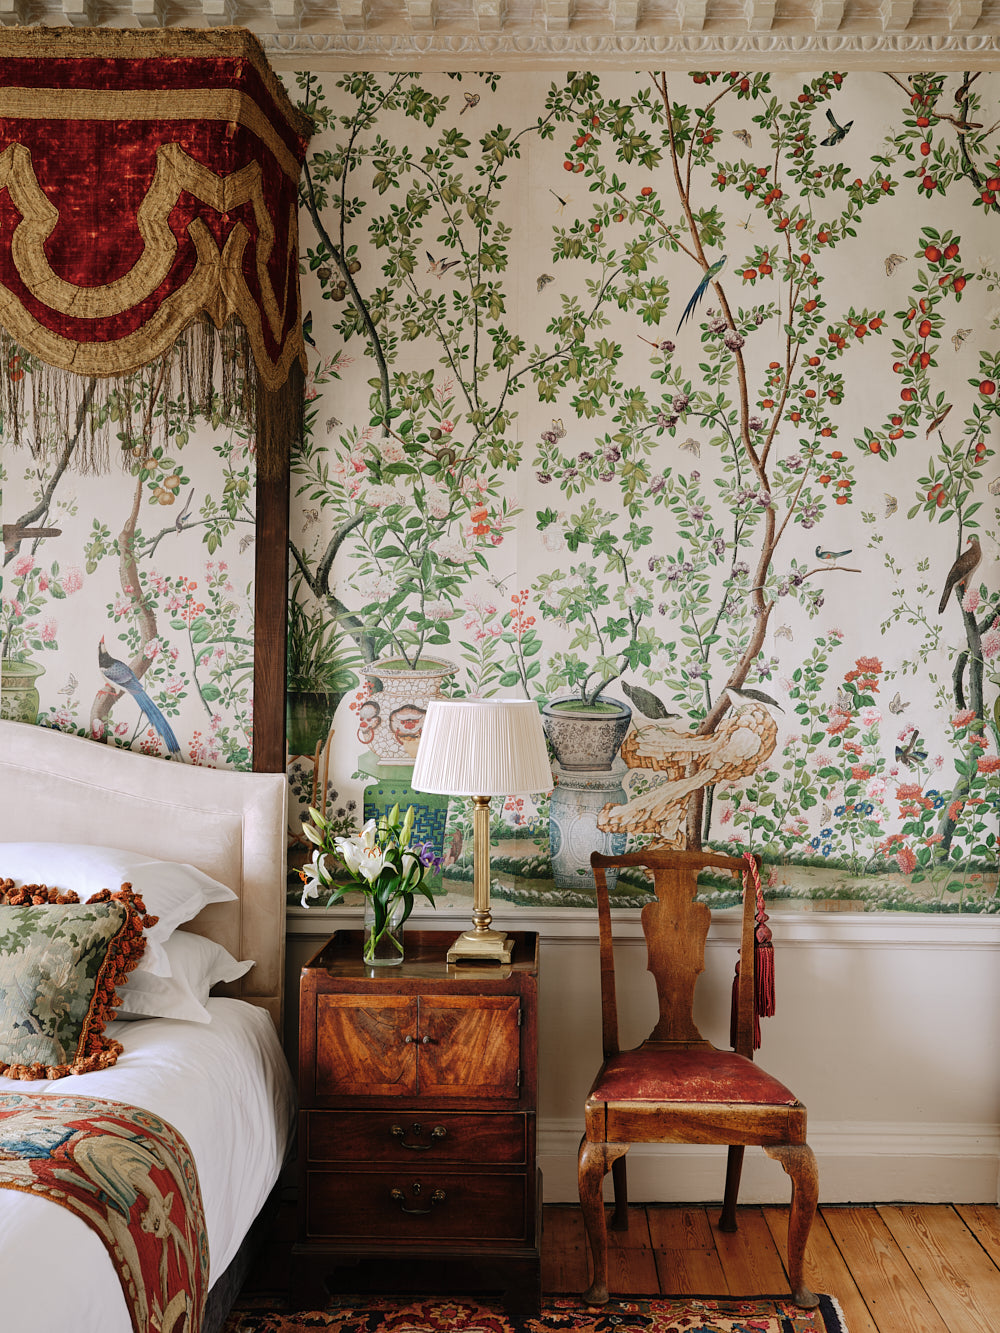 Chinoiserie Chic: A Summer Icon